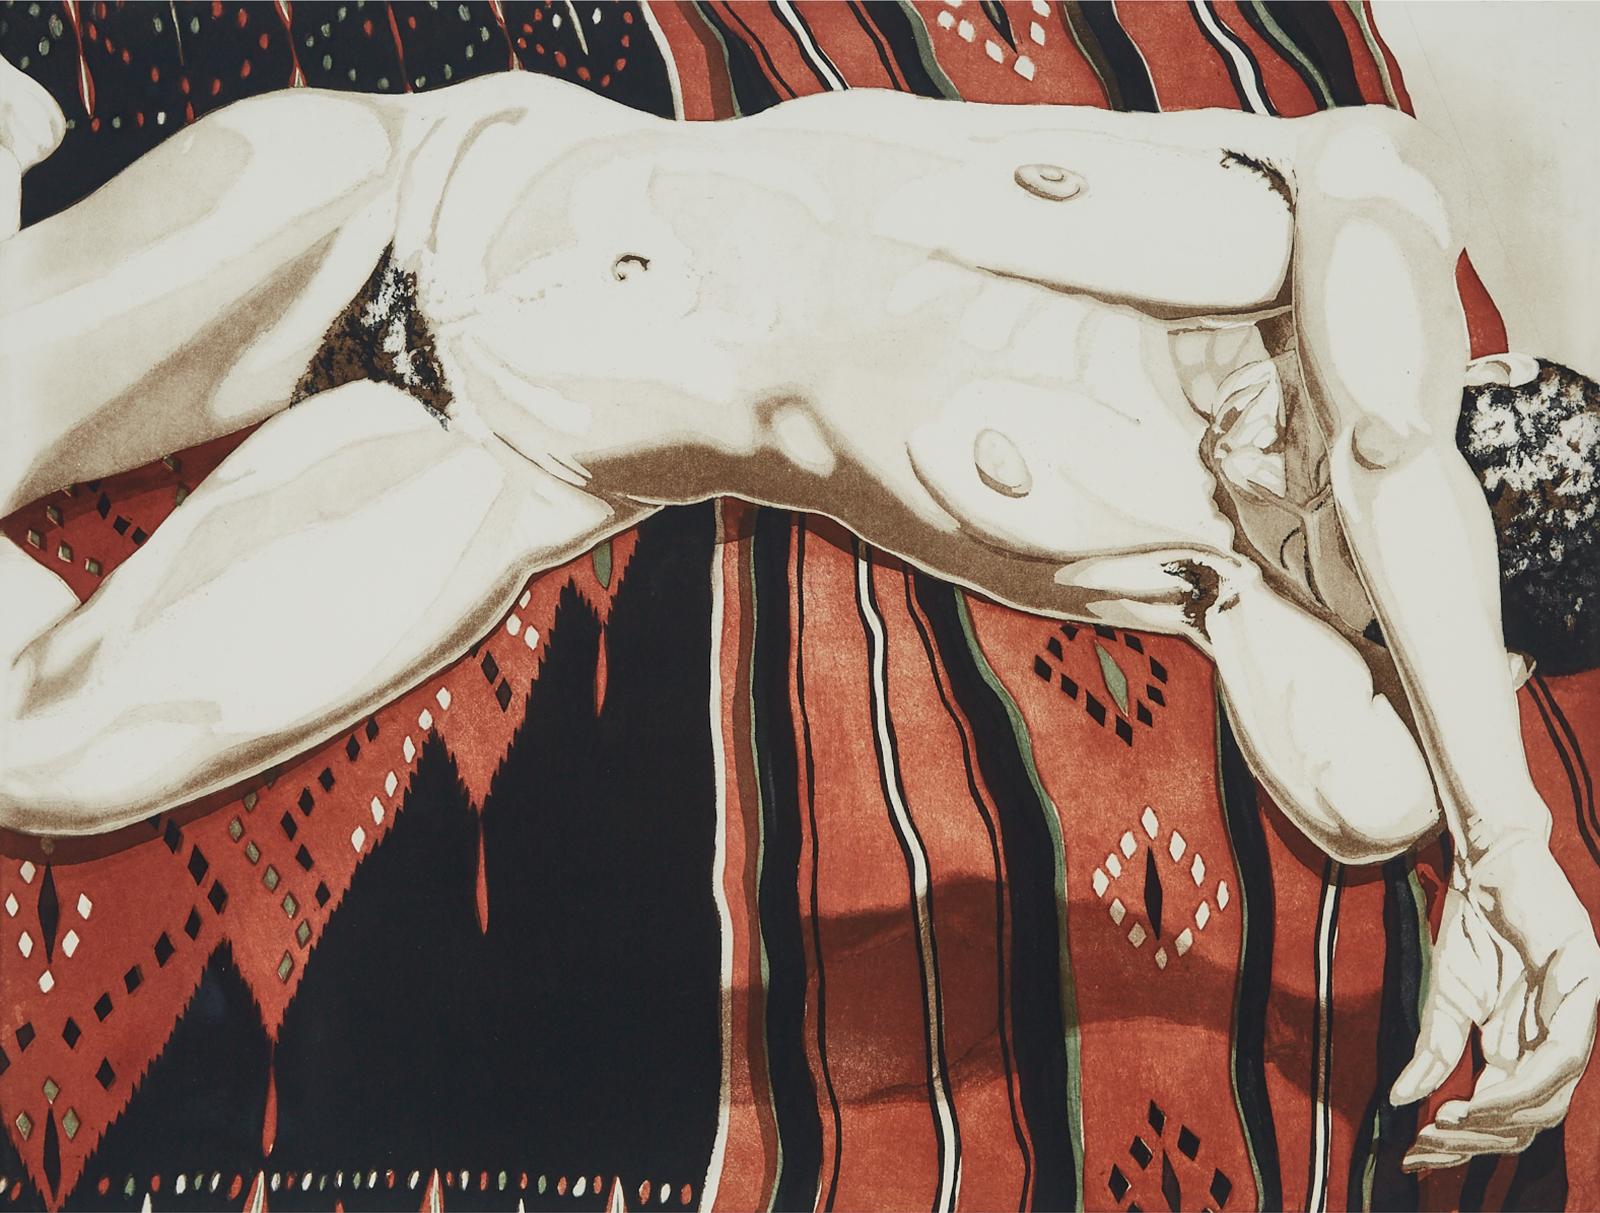 Philip Pearlstein (1924) - Nude Lying On Black And Red Blanket, 1974